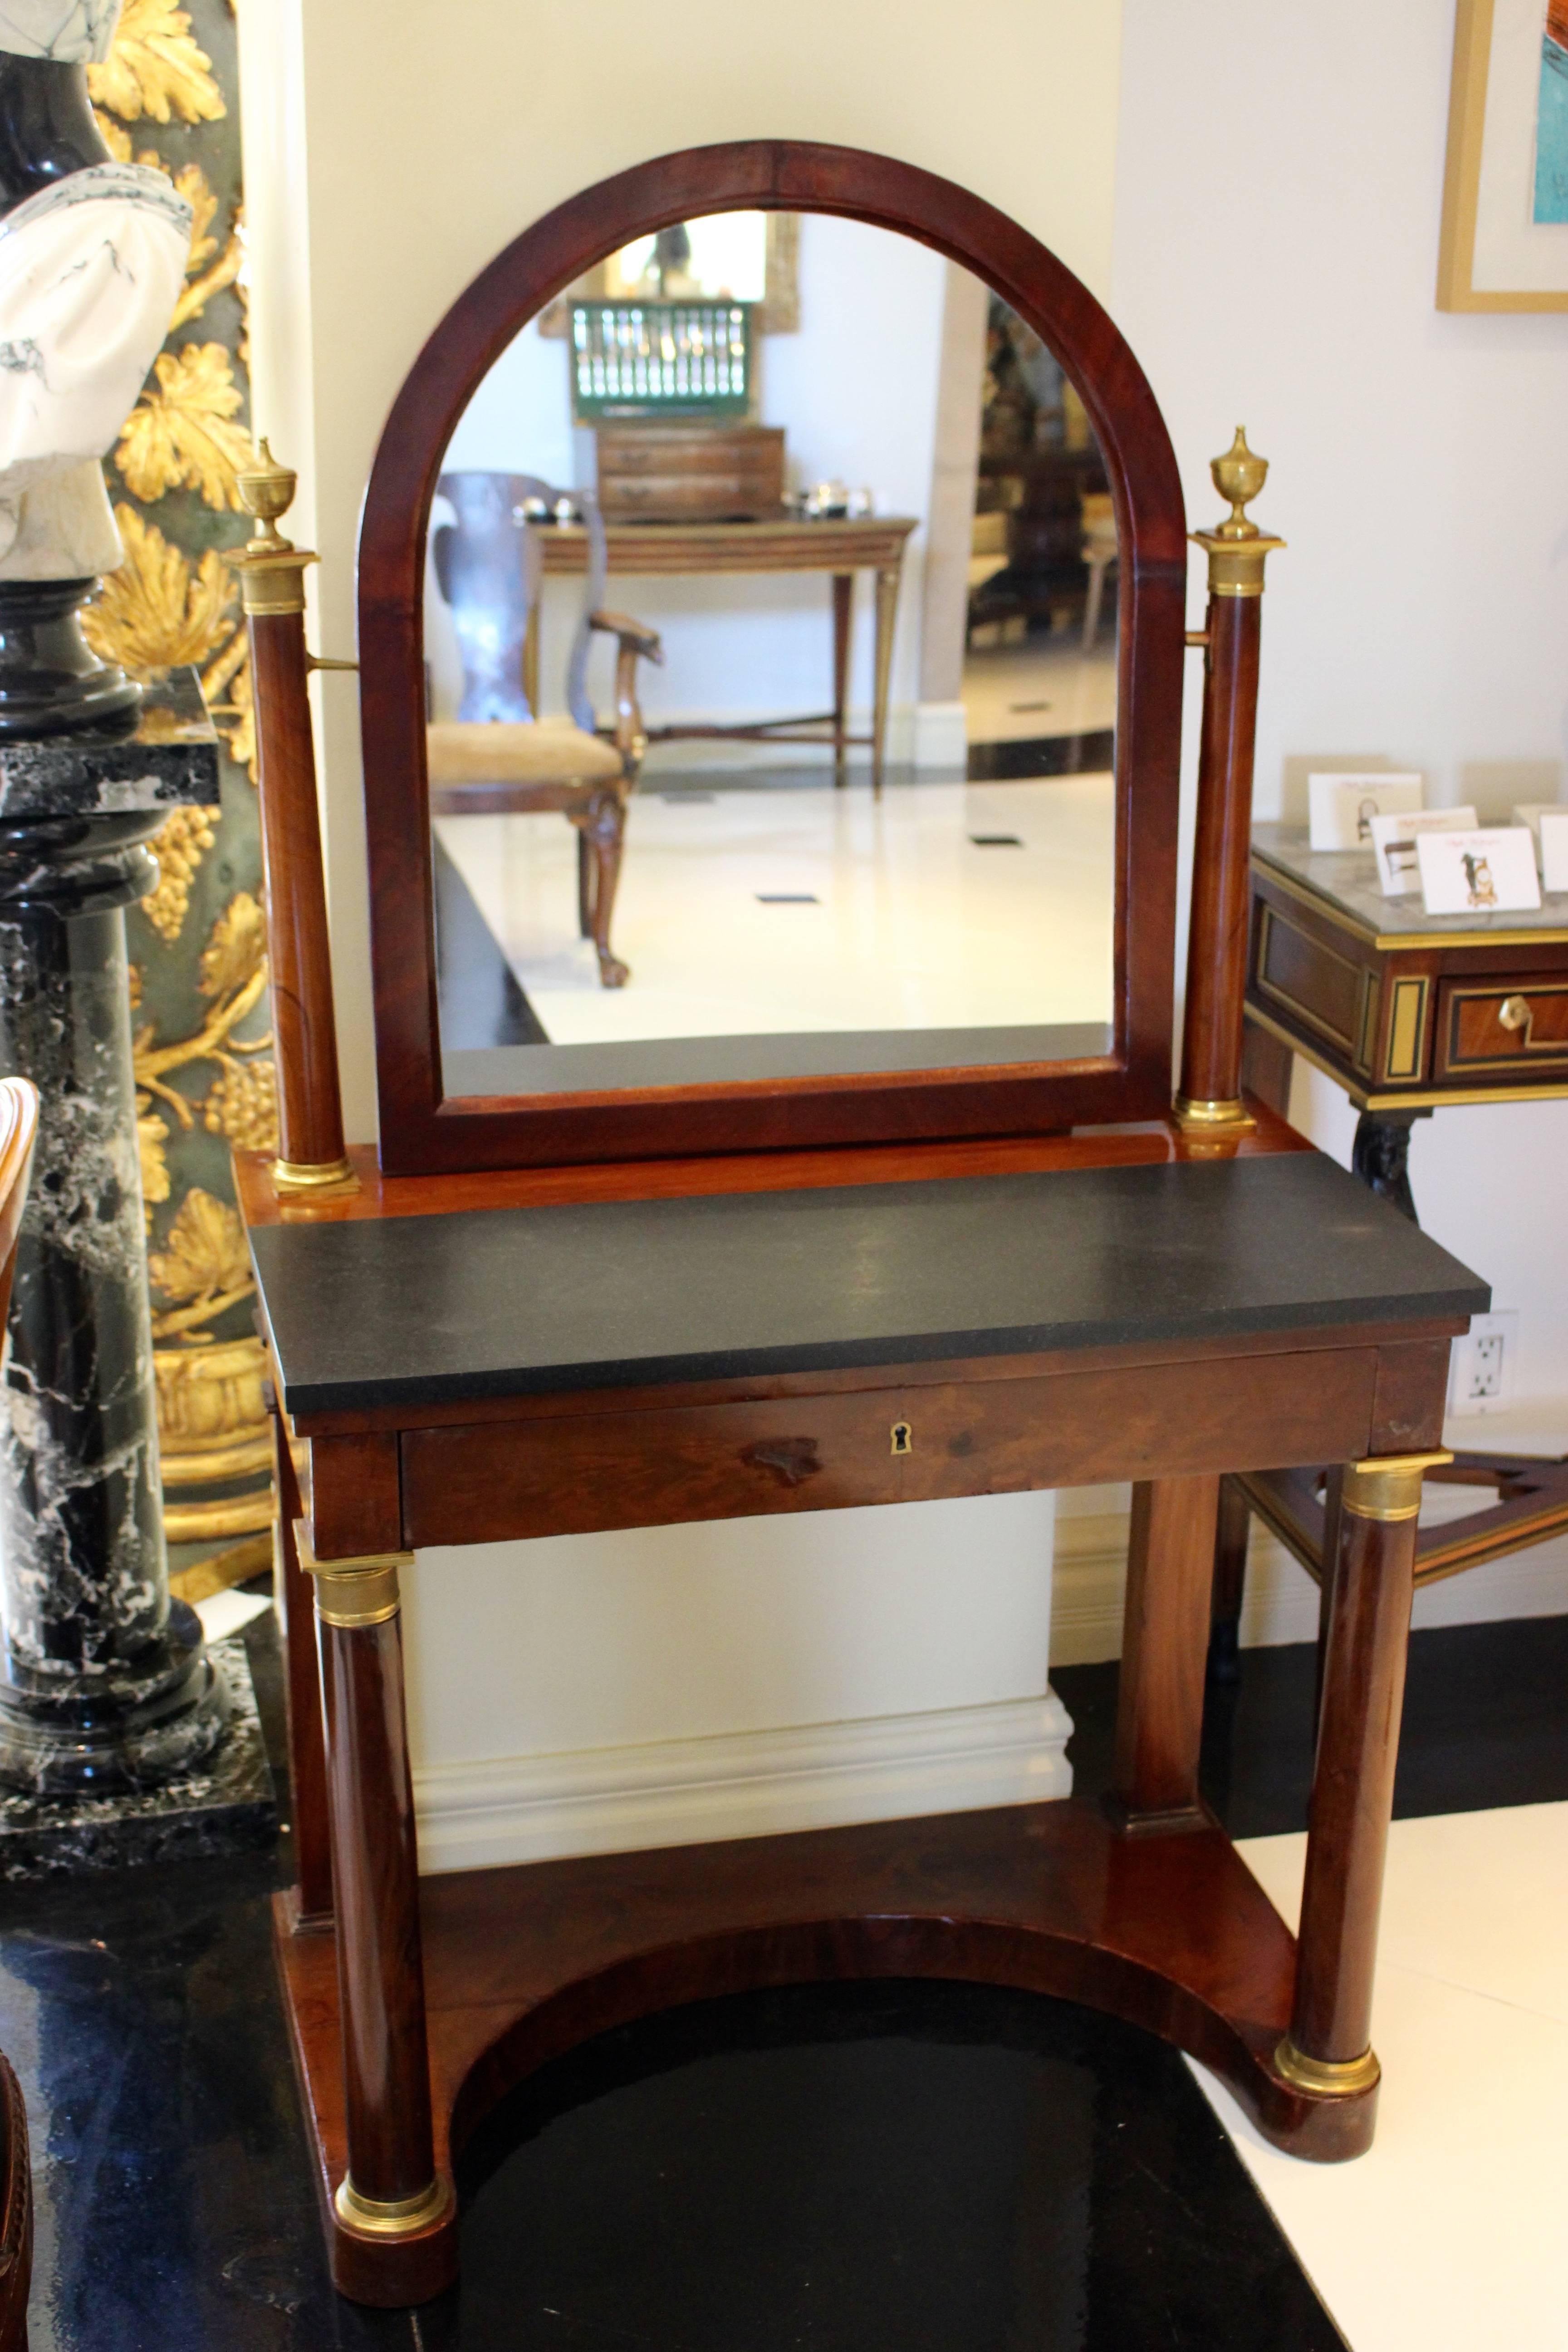 A French Empire period ormolu-mounted mahogany psyché dressing table from the early 19th century in neoclassical style. The rectangular black marble top is surmounted by an arched tilt mirror flanked by mahogany columns capped with urn finials above